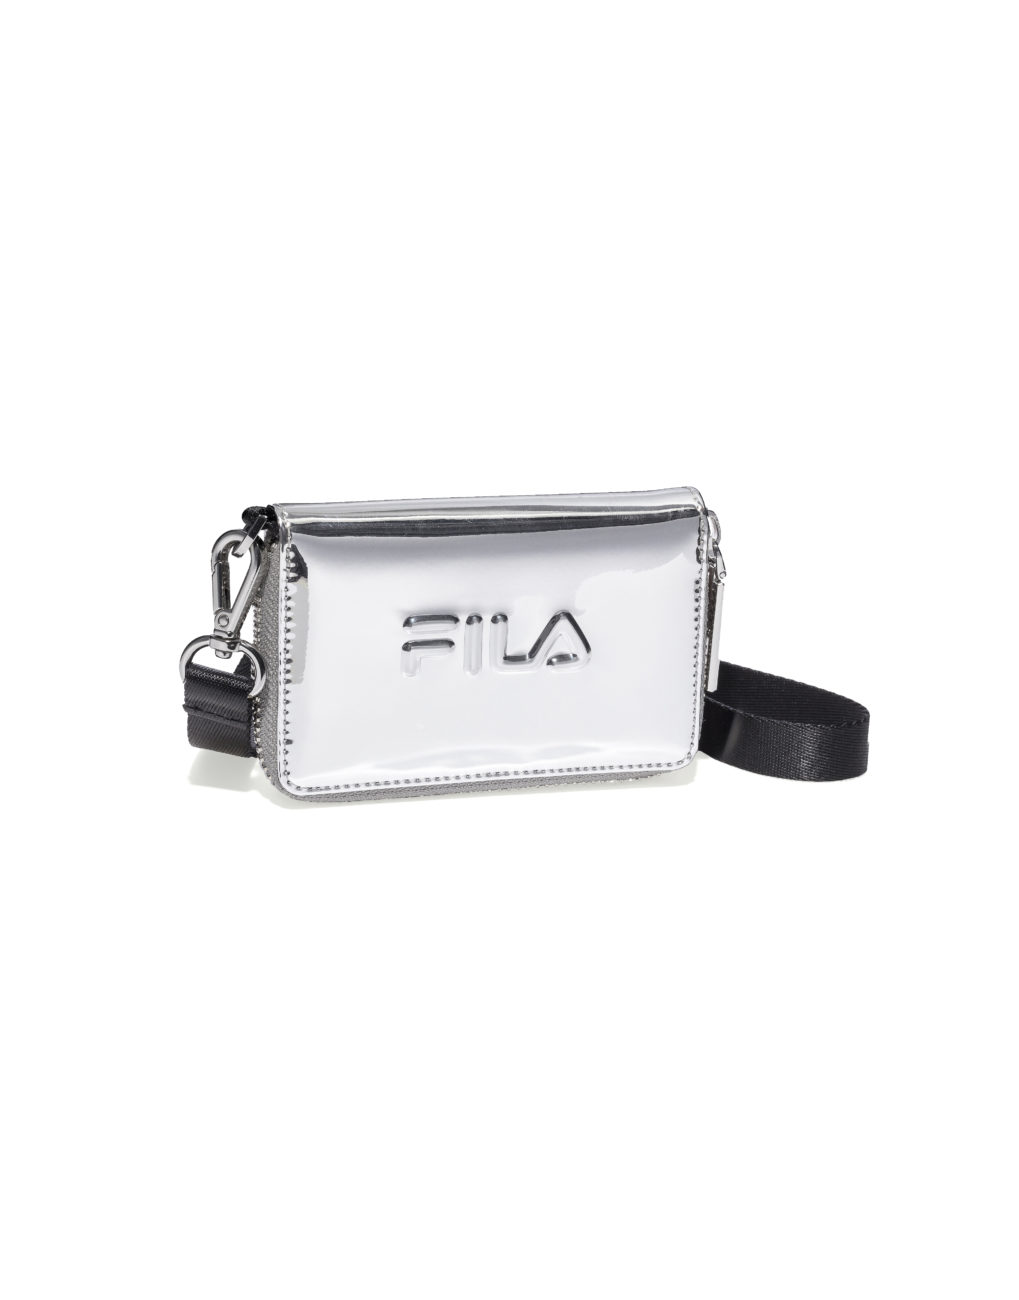 Fila See-Now-Buy-Now Capsule Collection SS 20, Courtesy of Fila